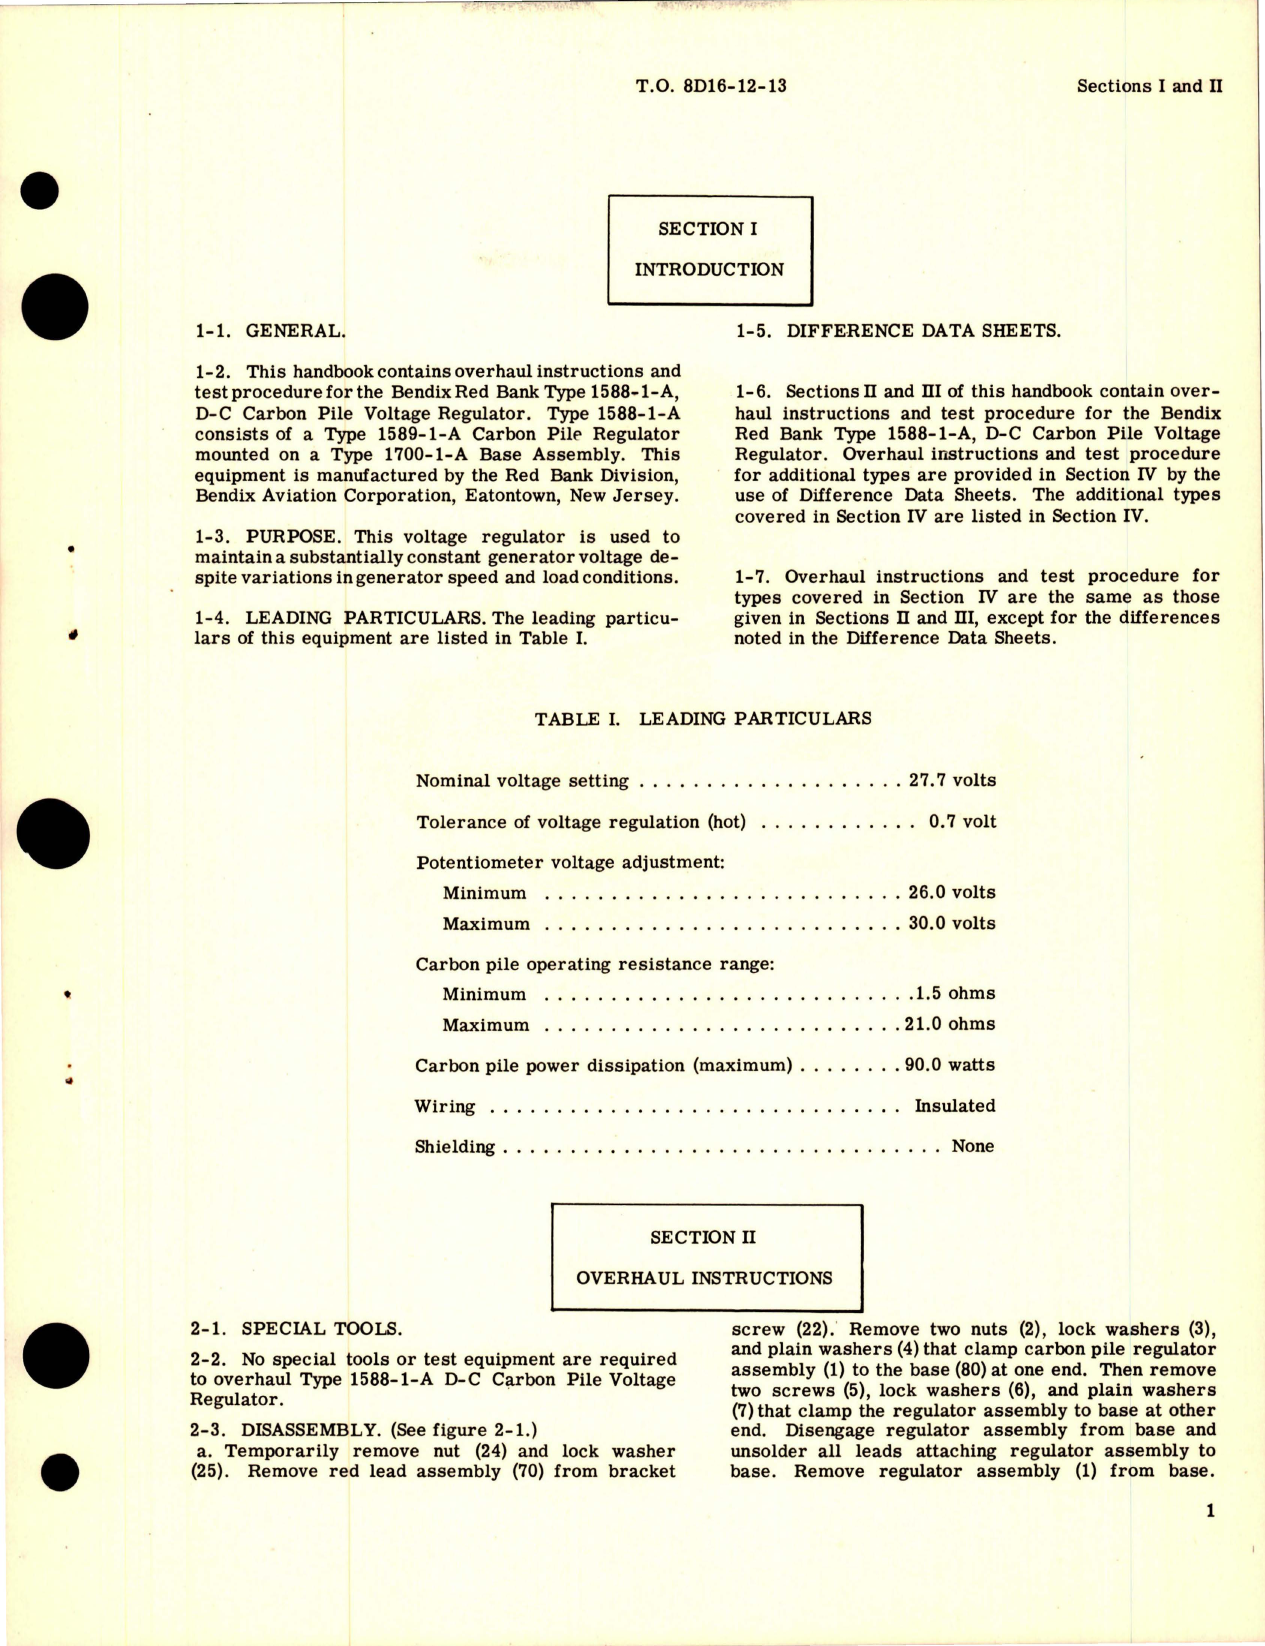 Sample page 5 from AirCorps Library document: Overhaul Instructions for D-C Carbon Pile Voltage Regulator 